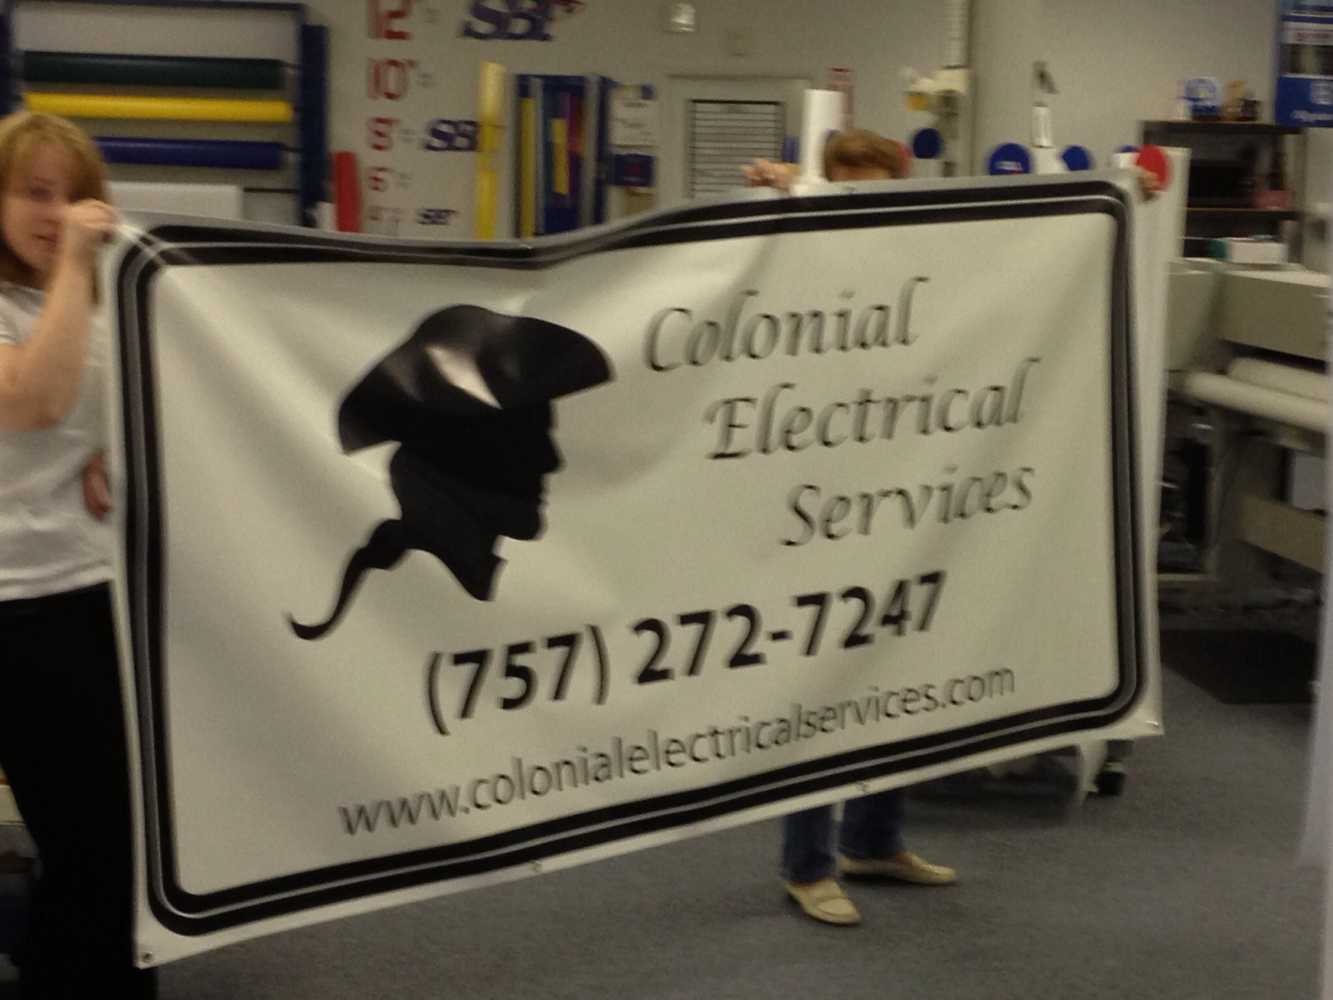 Projects by Colonial Electrical Services